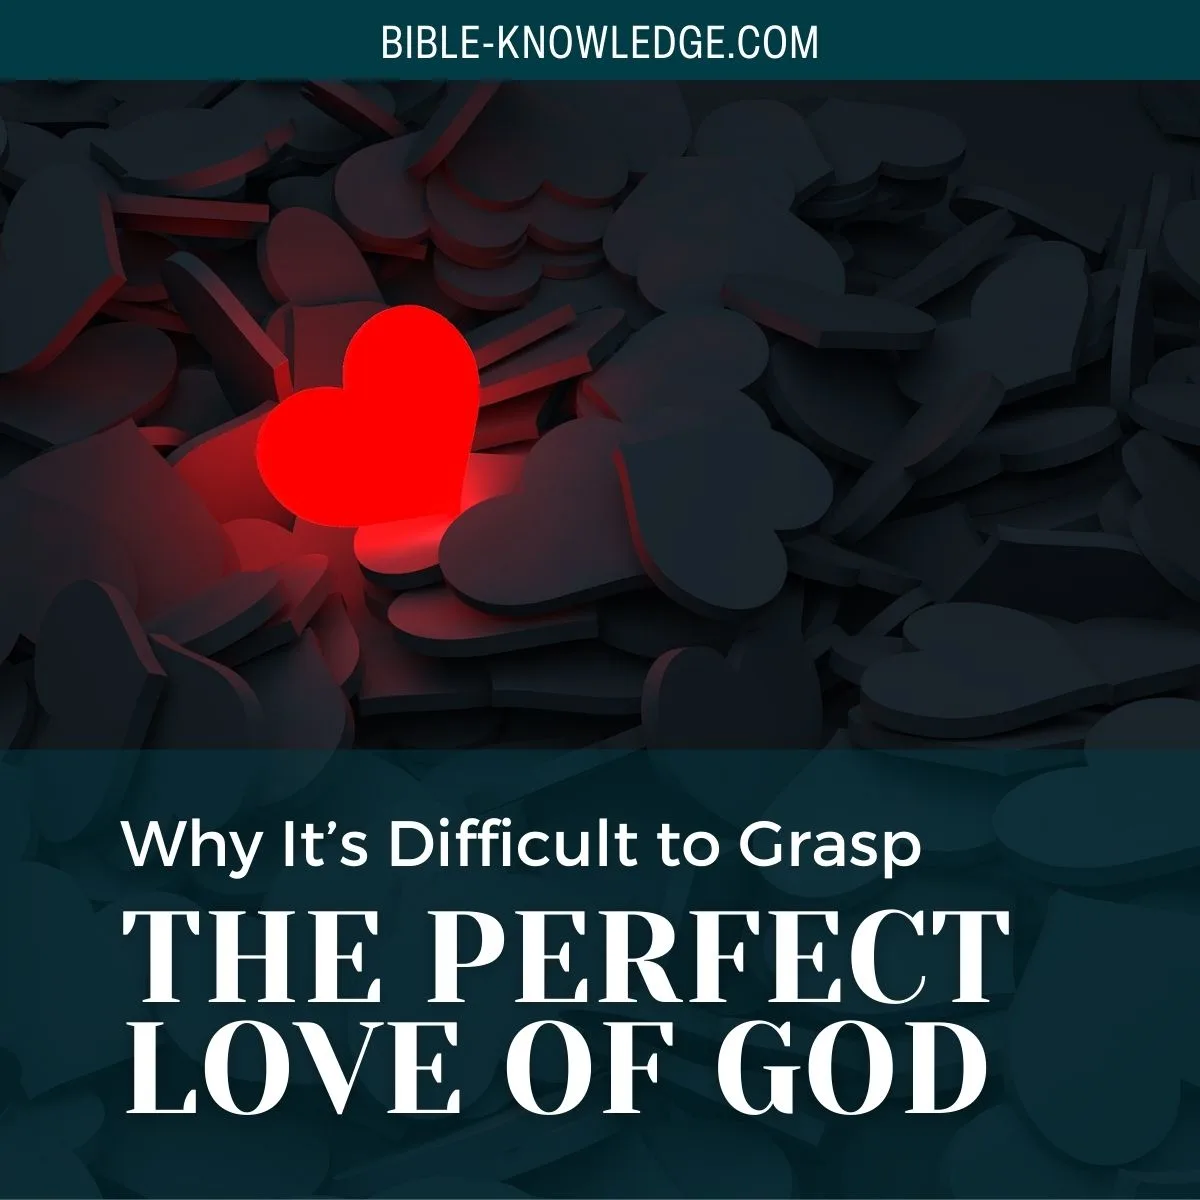 Why It’s Difficult to Grasp the Perfect Love of God